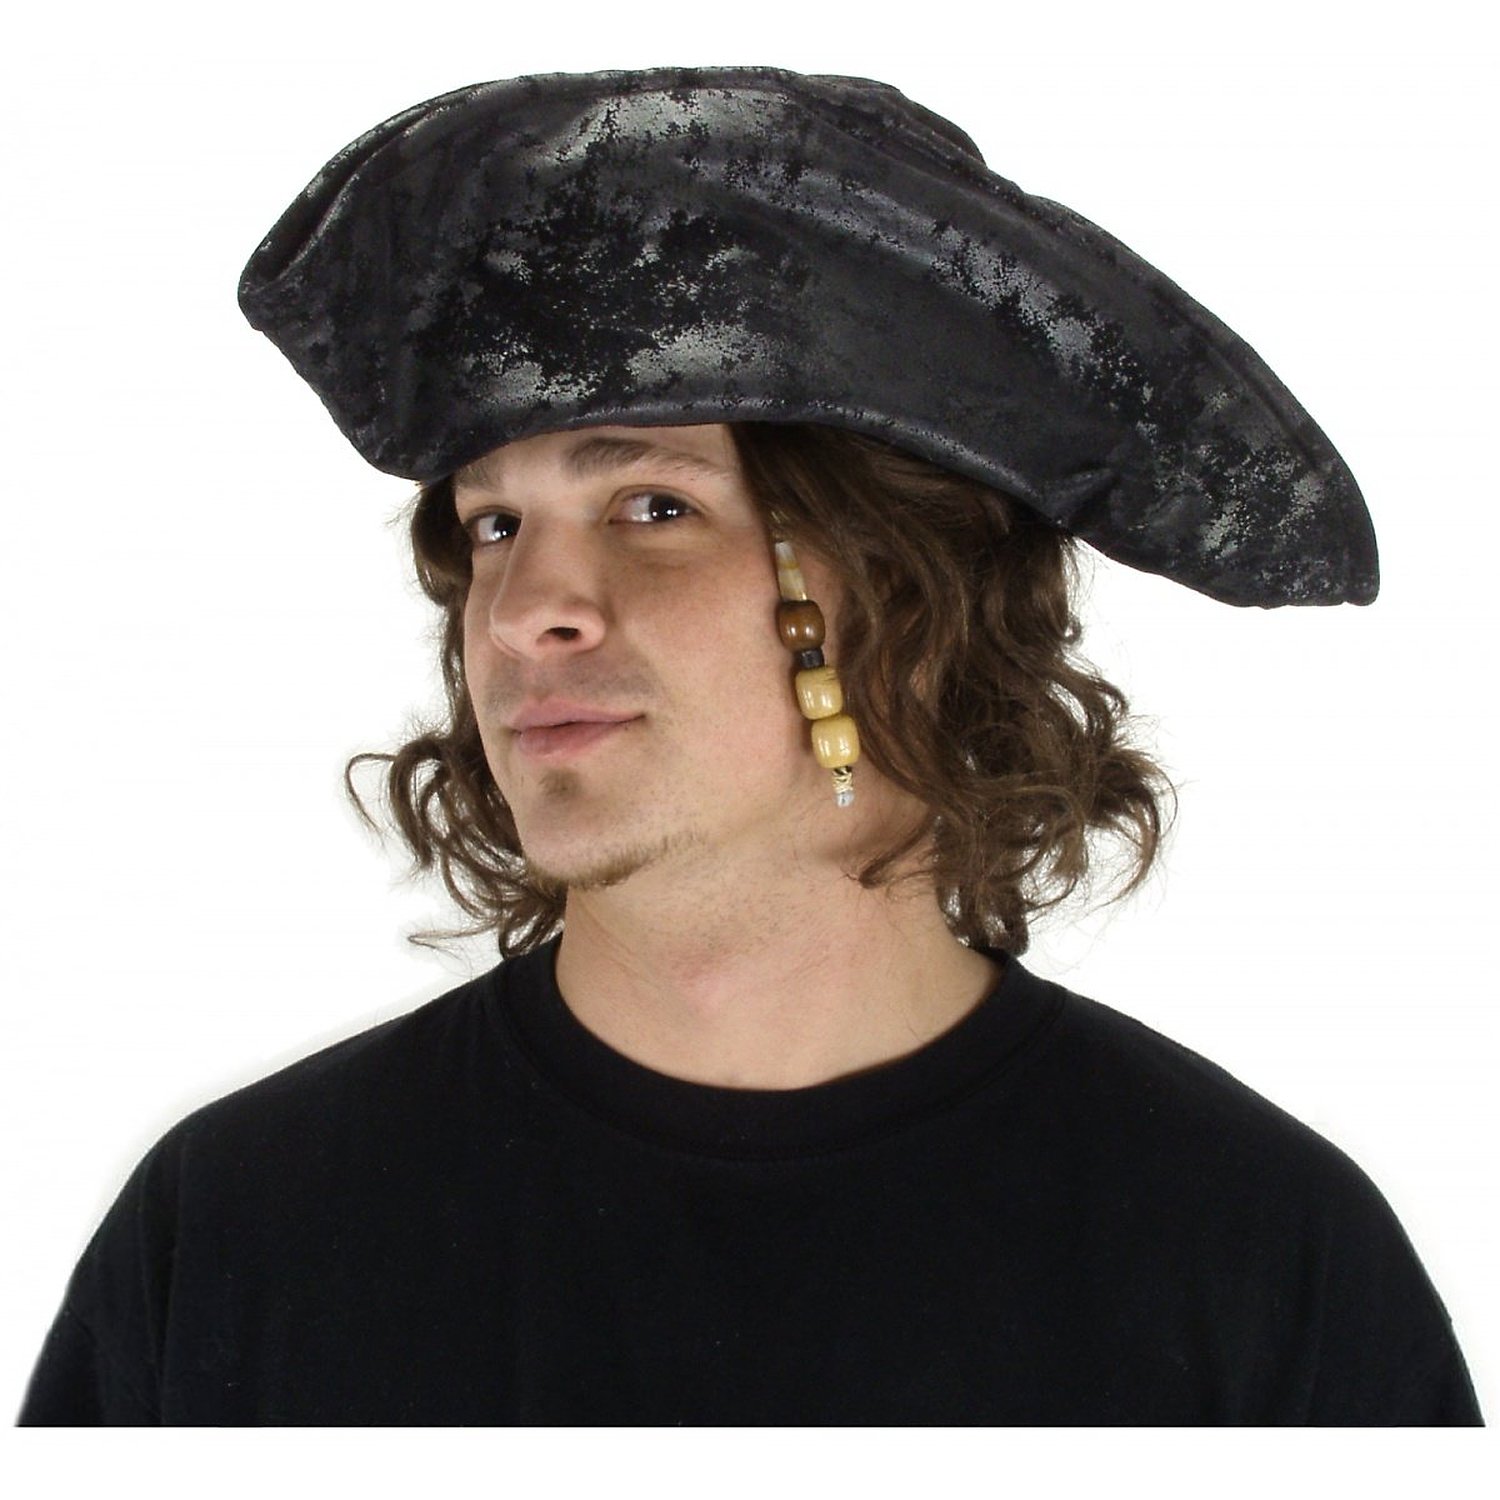 Amazon.com: elope Black Old Pirate Hat: Costume Headwear And Hats ...